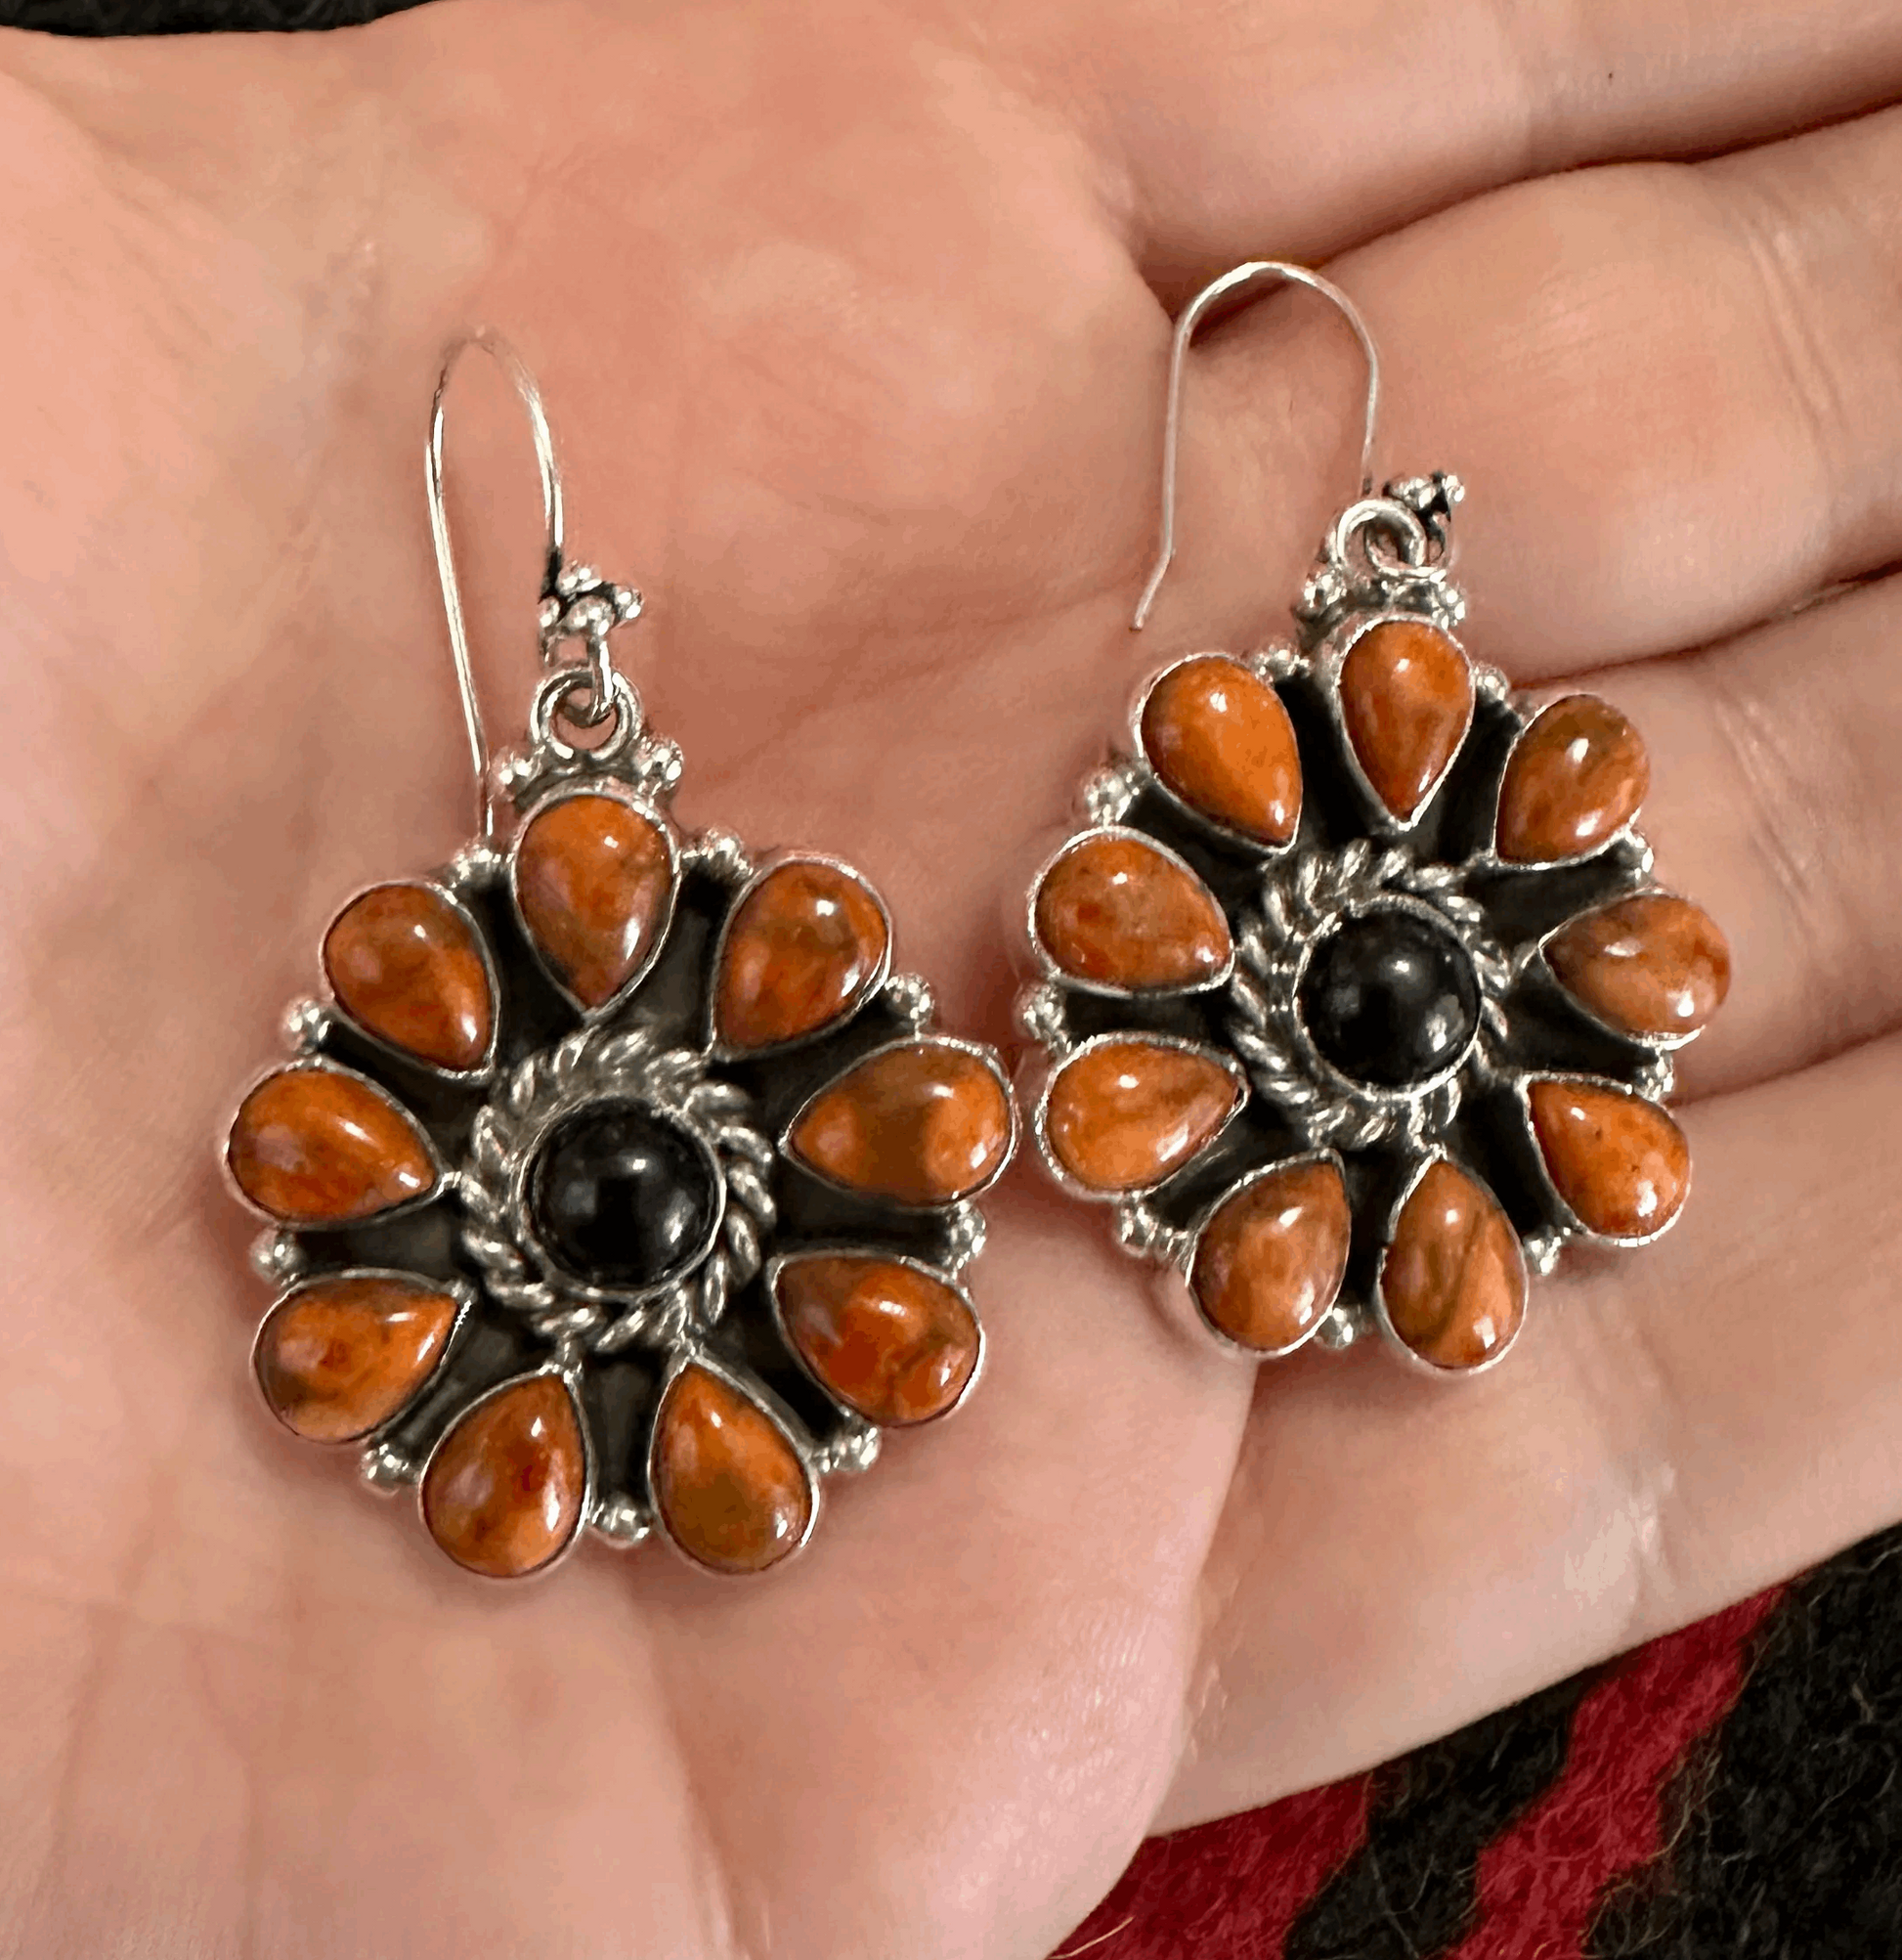 Sterling silver earrings that feature a ring of teardrop shaped orange Mojave stones around a beautiful round onyx stone. These earrings feature a sterling silver hook ear wire.